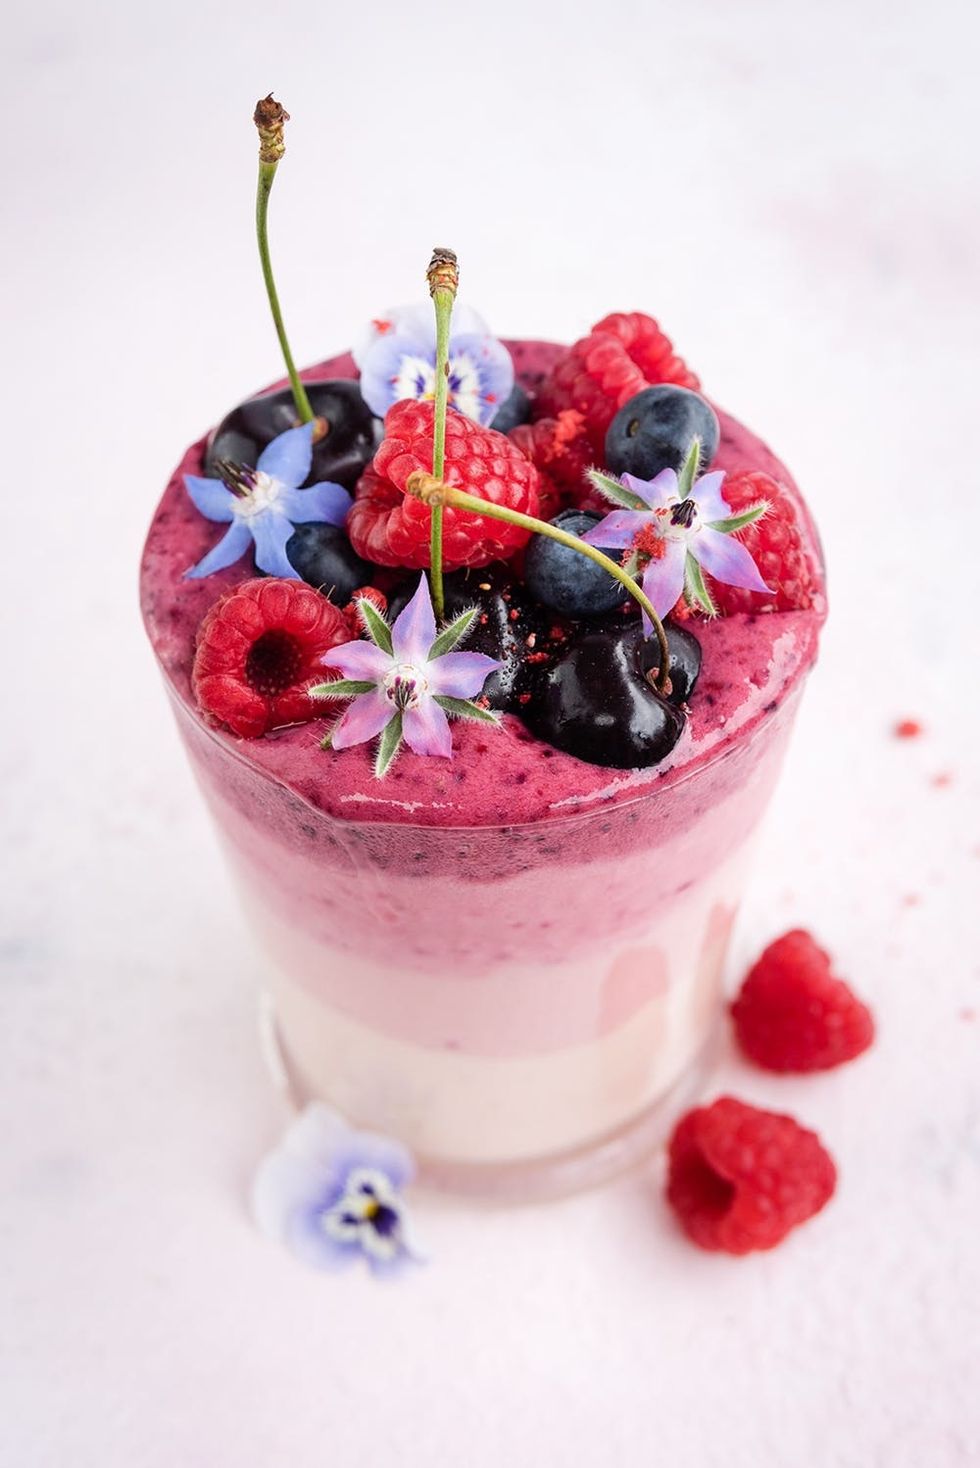 This layered ombre smoothie is almost too pretty to drink!